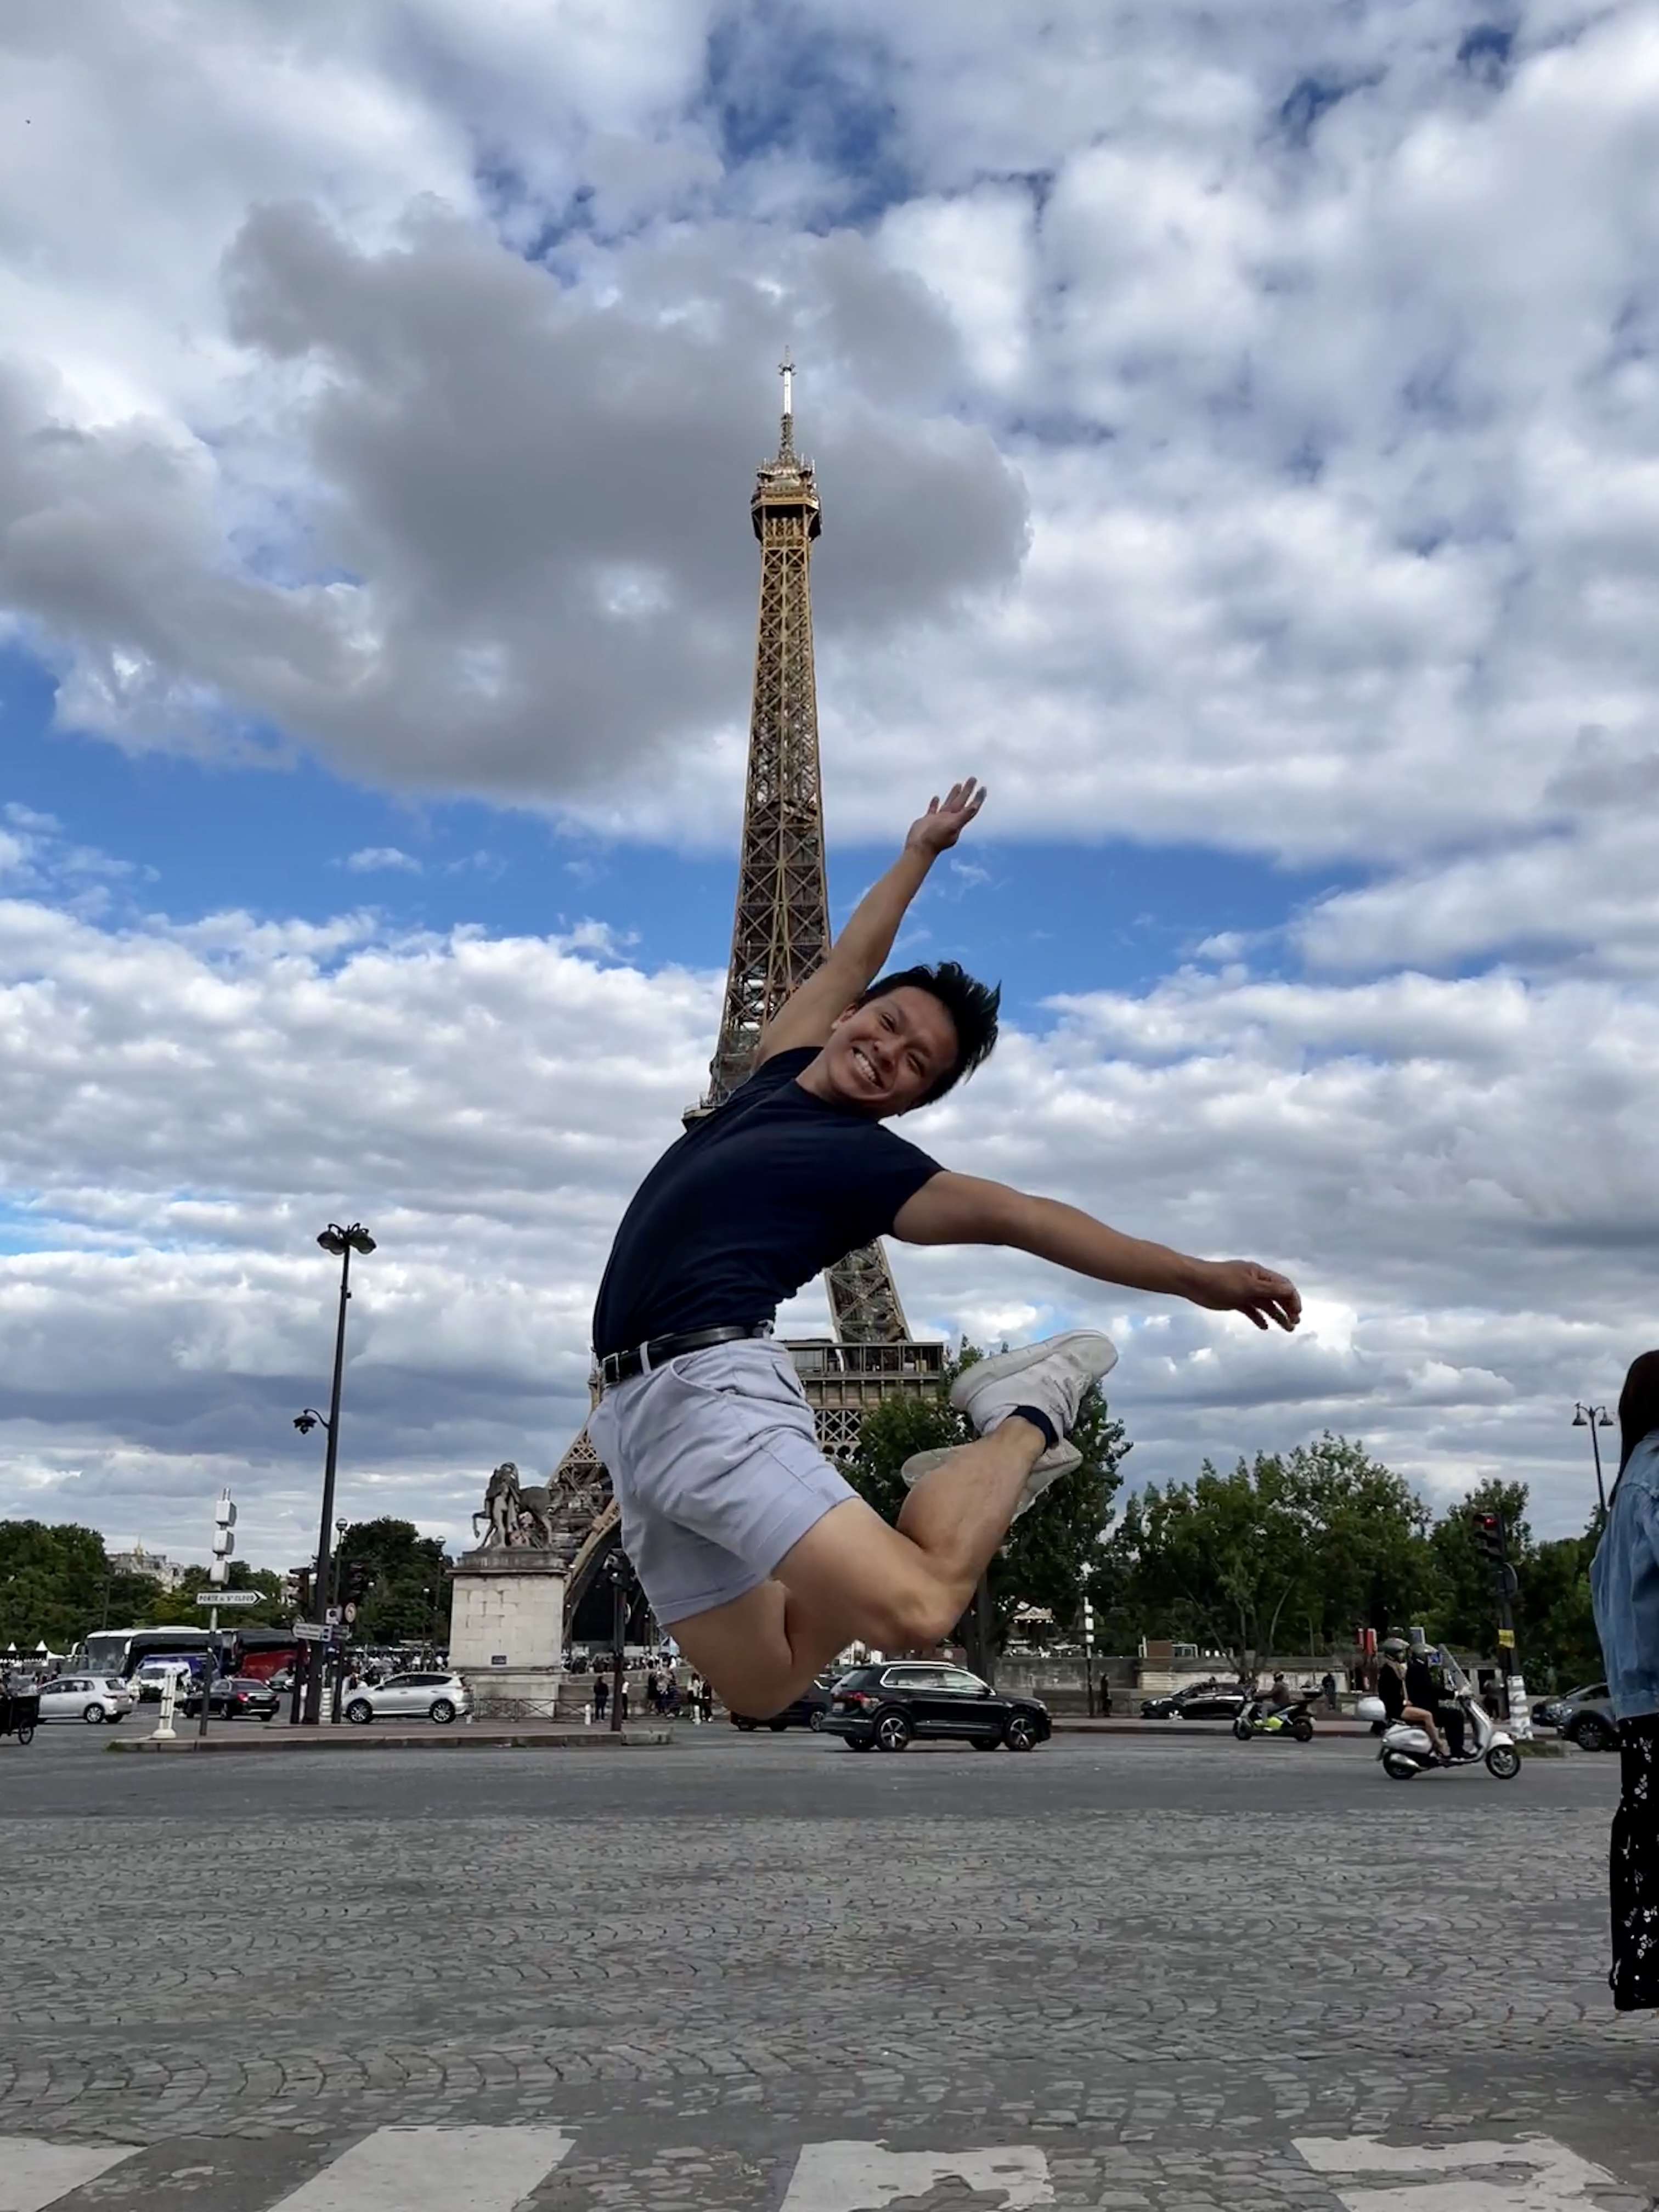 Johnny dancing in front of the Eiffel Tower in Paris